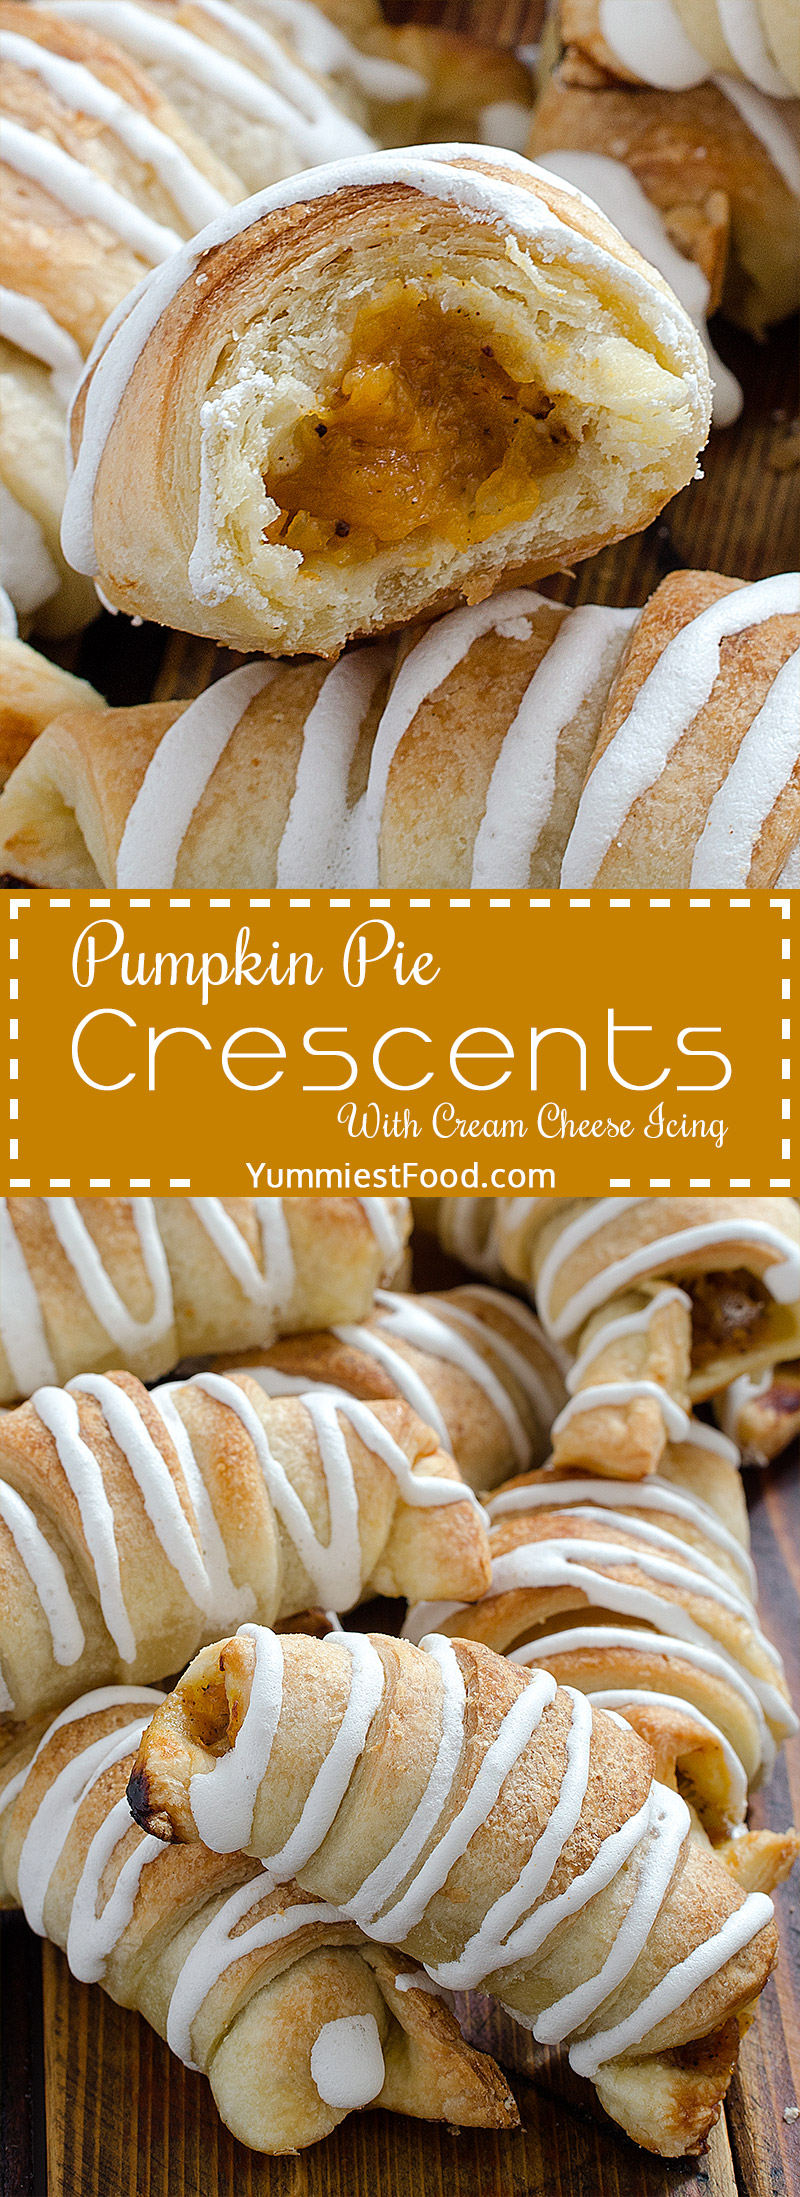 Pumpkin pie crescents with cream cheese icing are the perfect pastry for fall